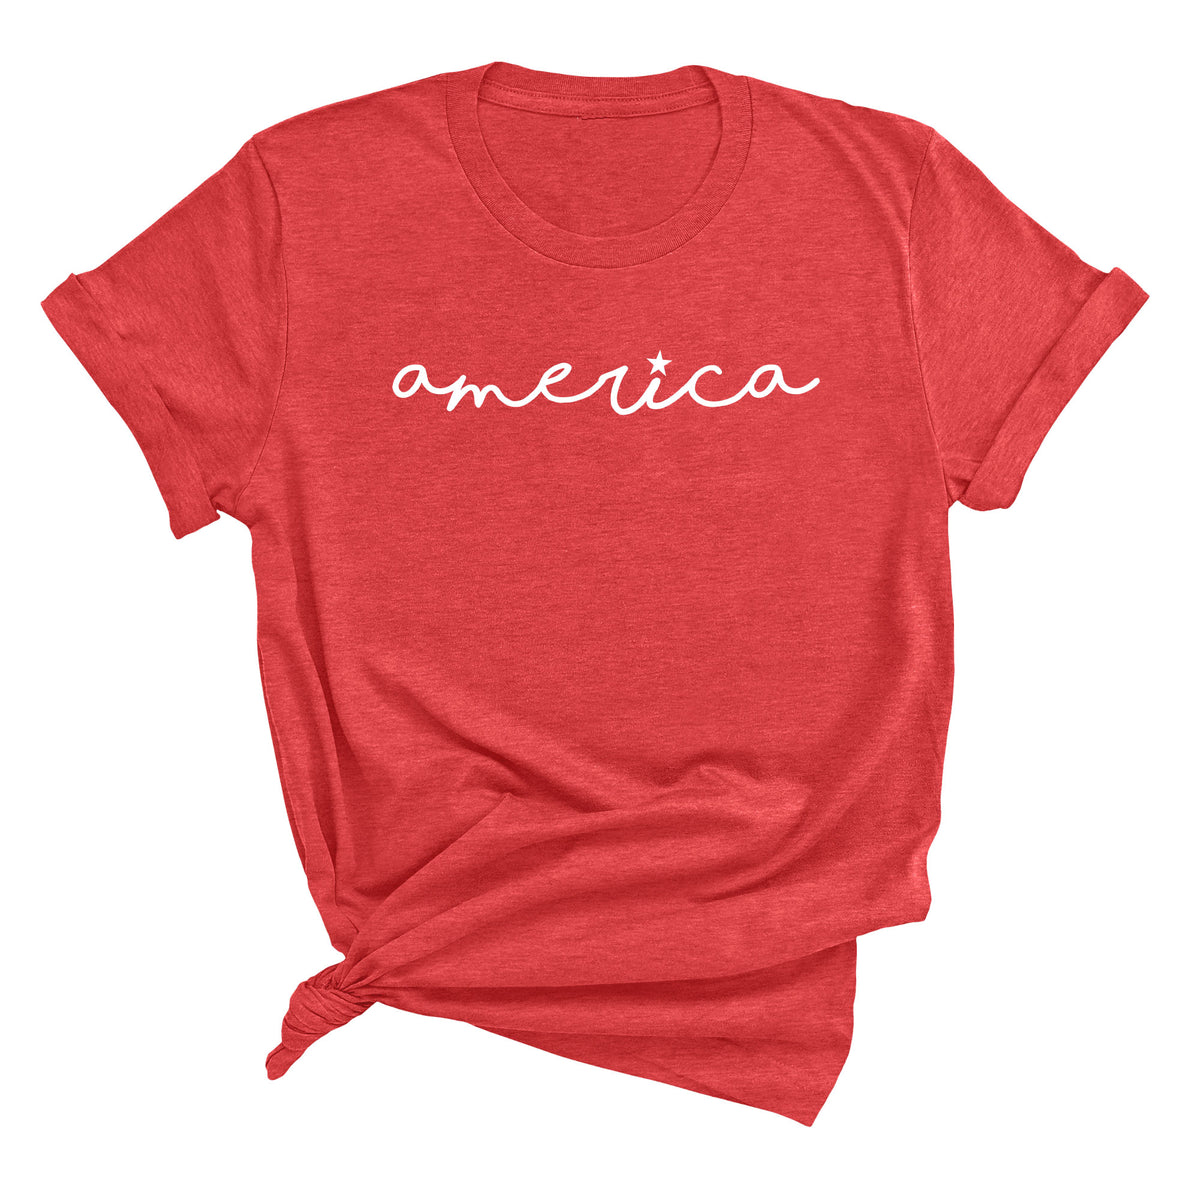 America with Star I Unisex T-Shirt